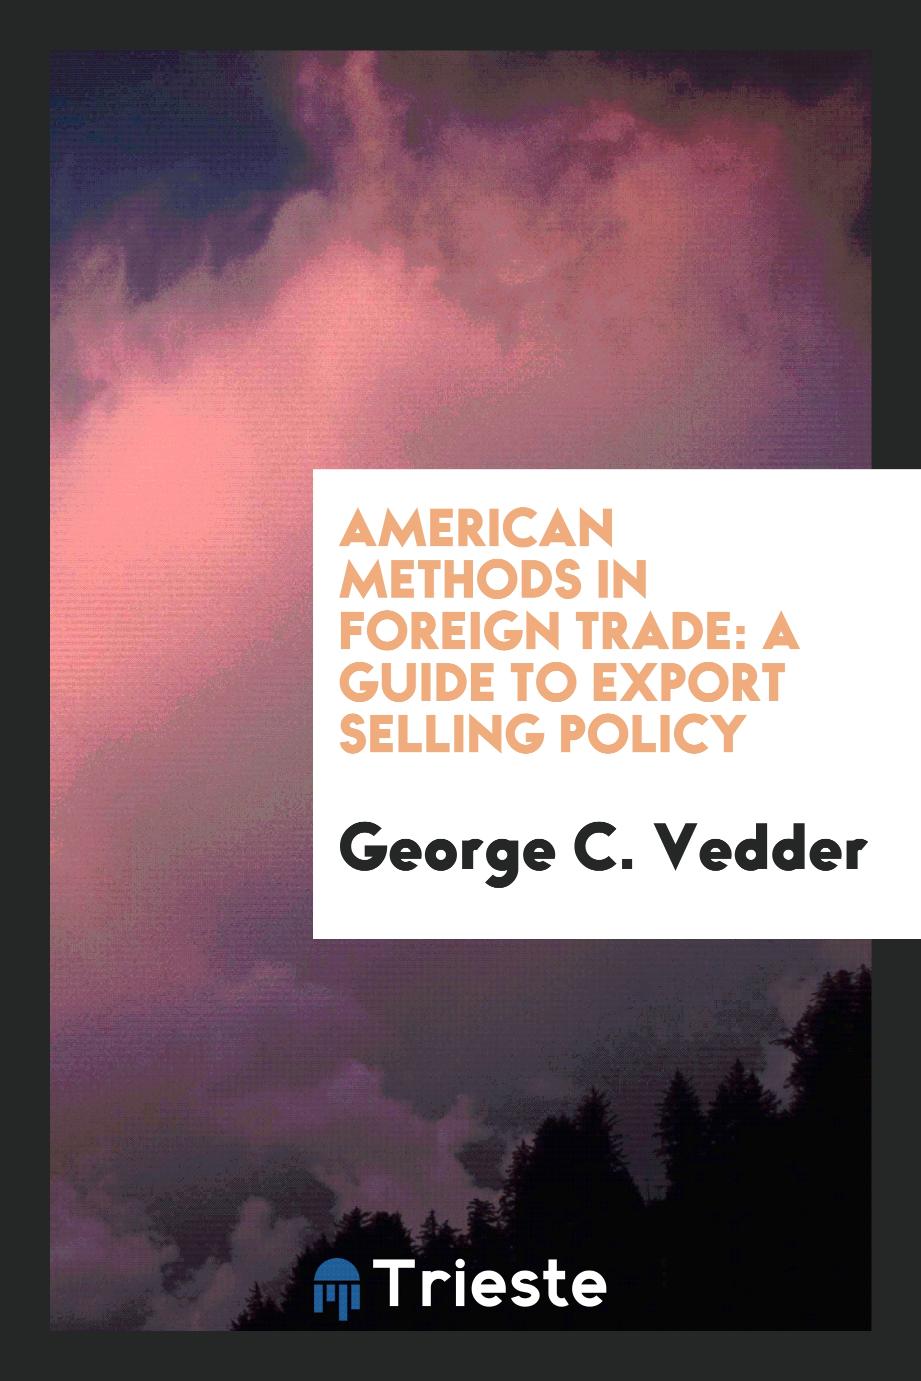 American Methods in Foreign Trade: A Guide to Export Selling Policy